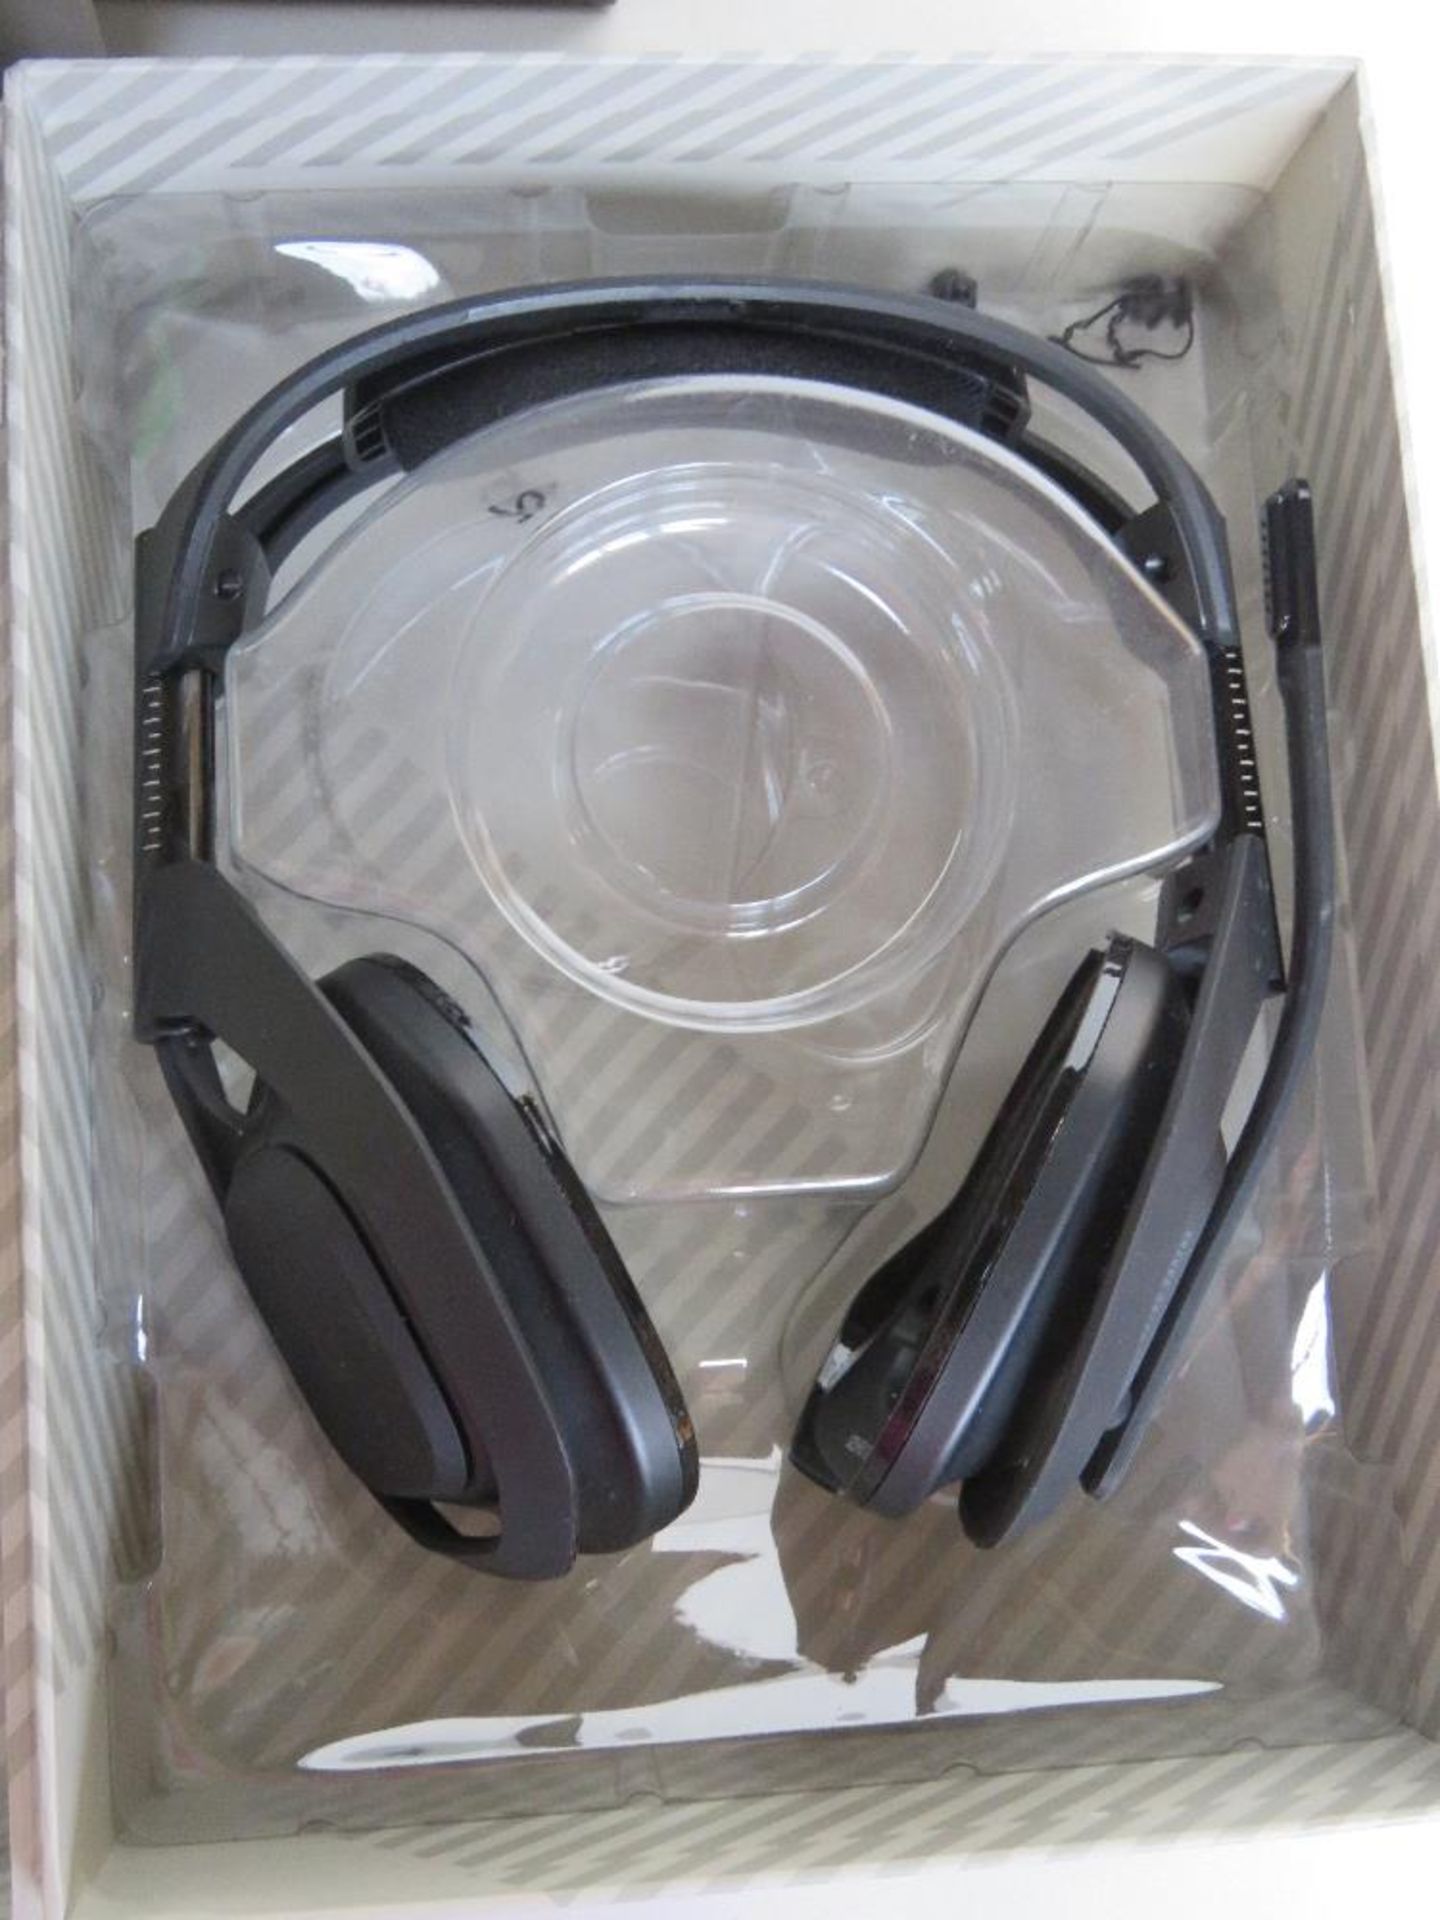 An Astro A50 wireless headset and base station, no pads, in original box, box outer a/f. - Image 2 of 4